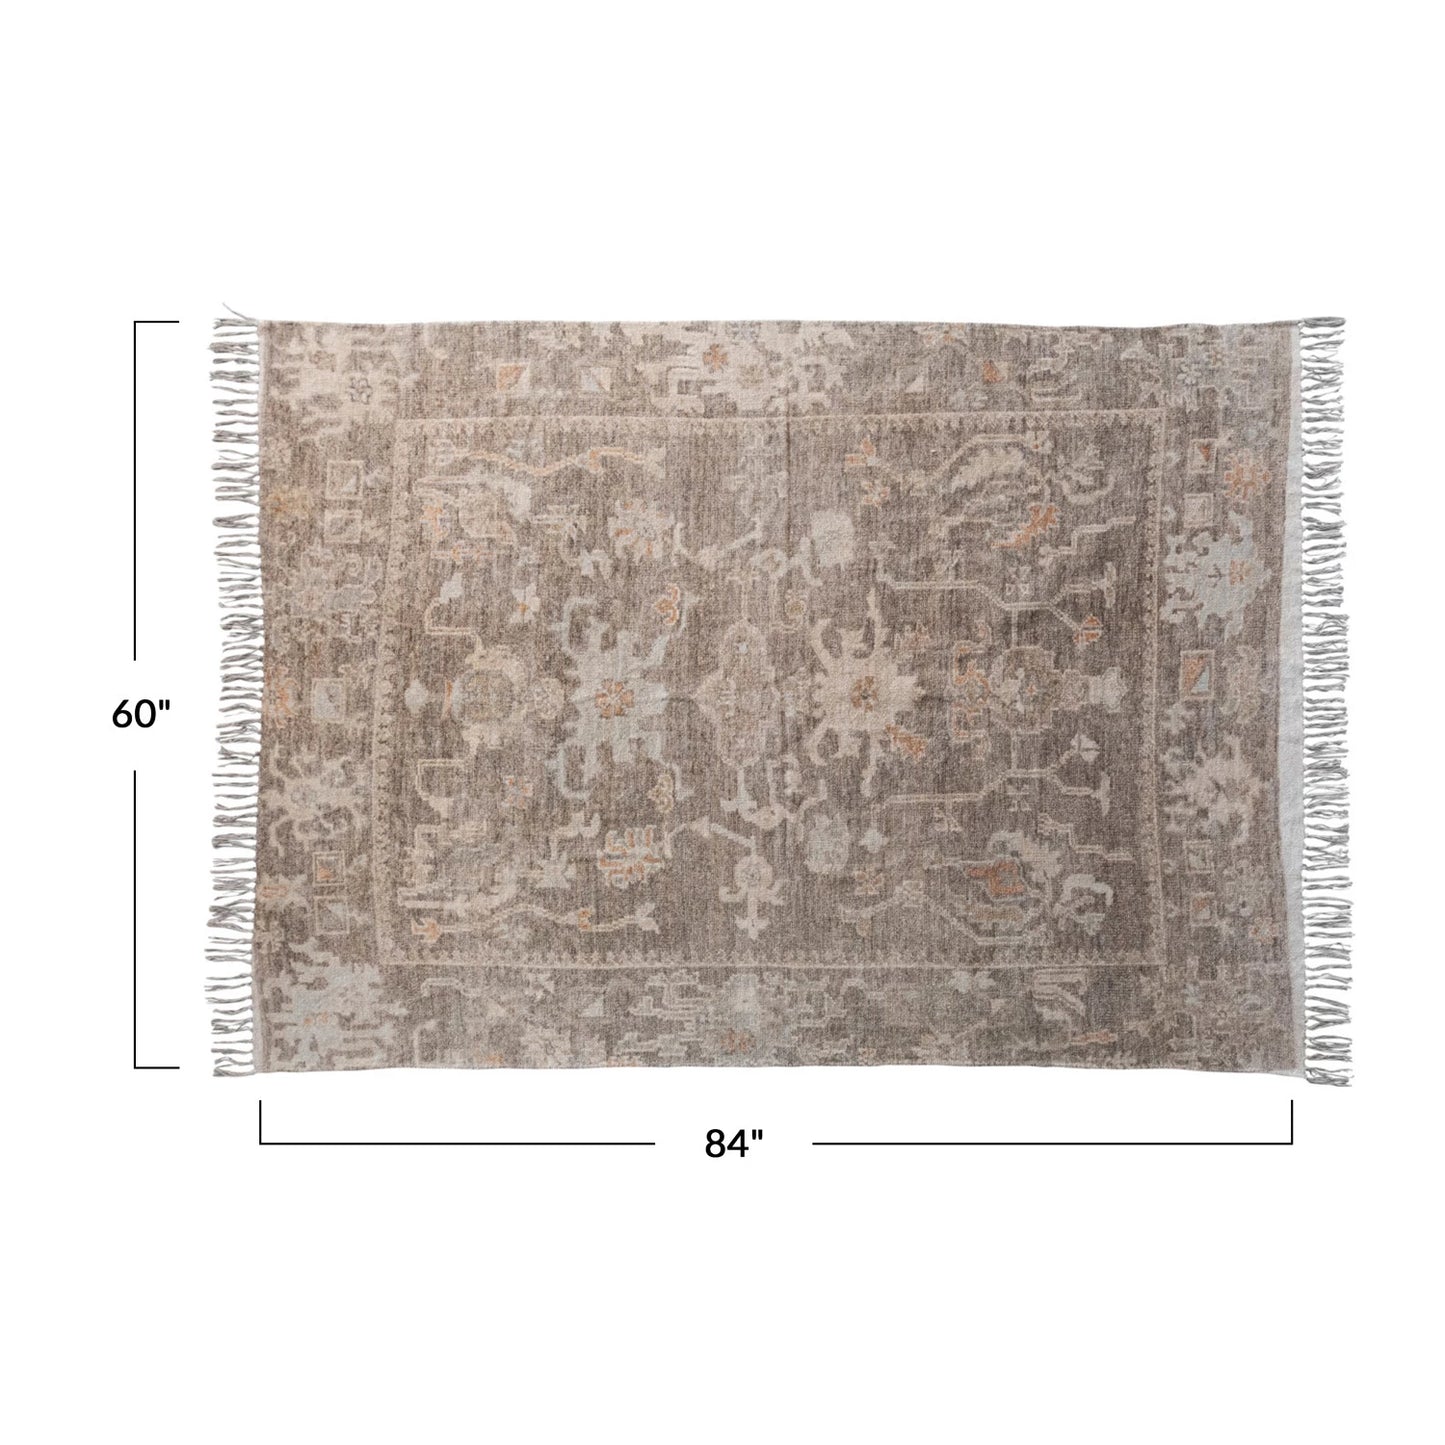 Collected Notions Chenille Distress 5'x7' Rug